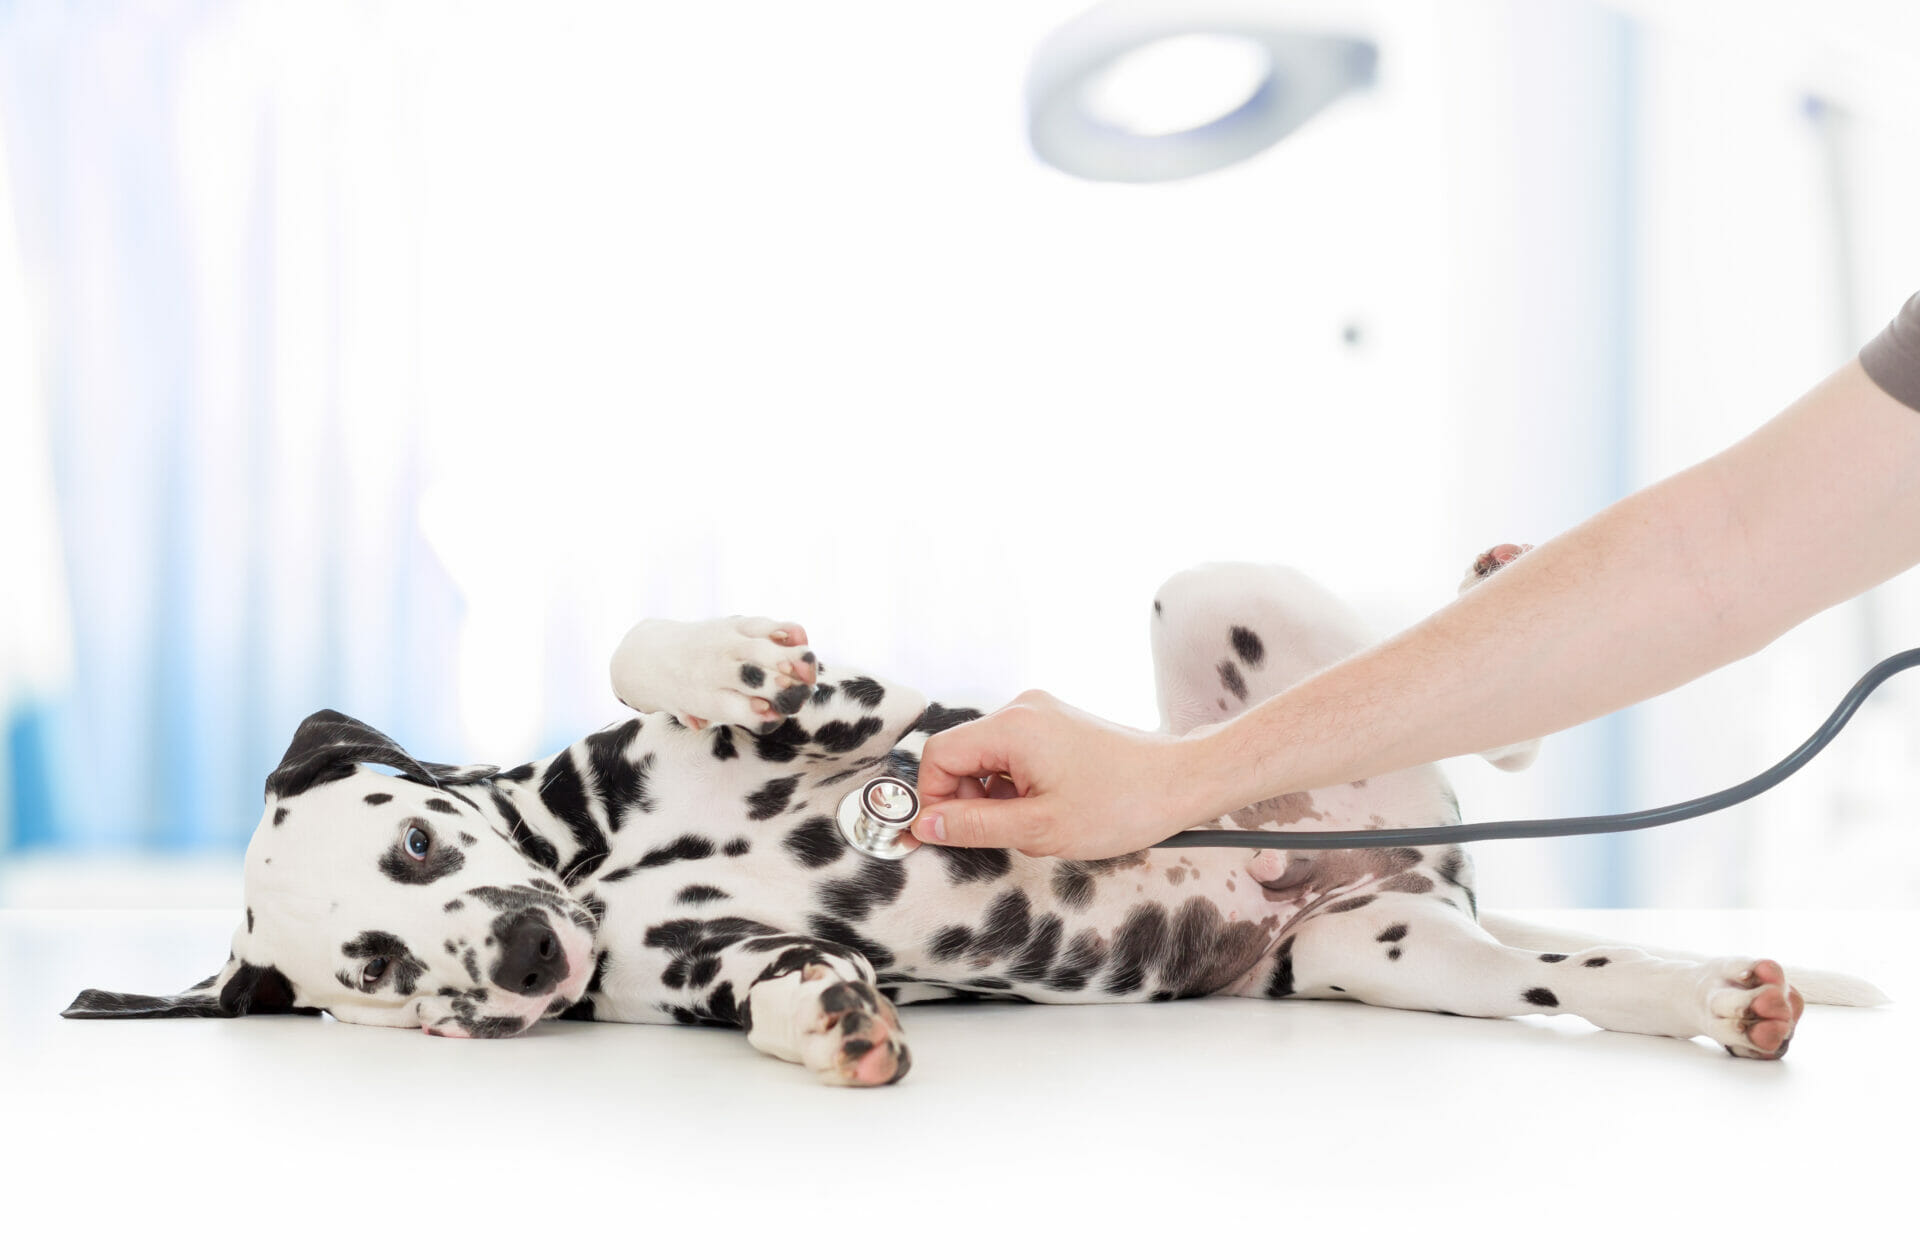 Dalmatian on the table